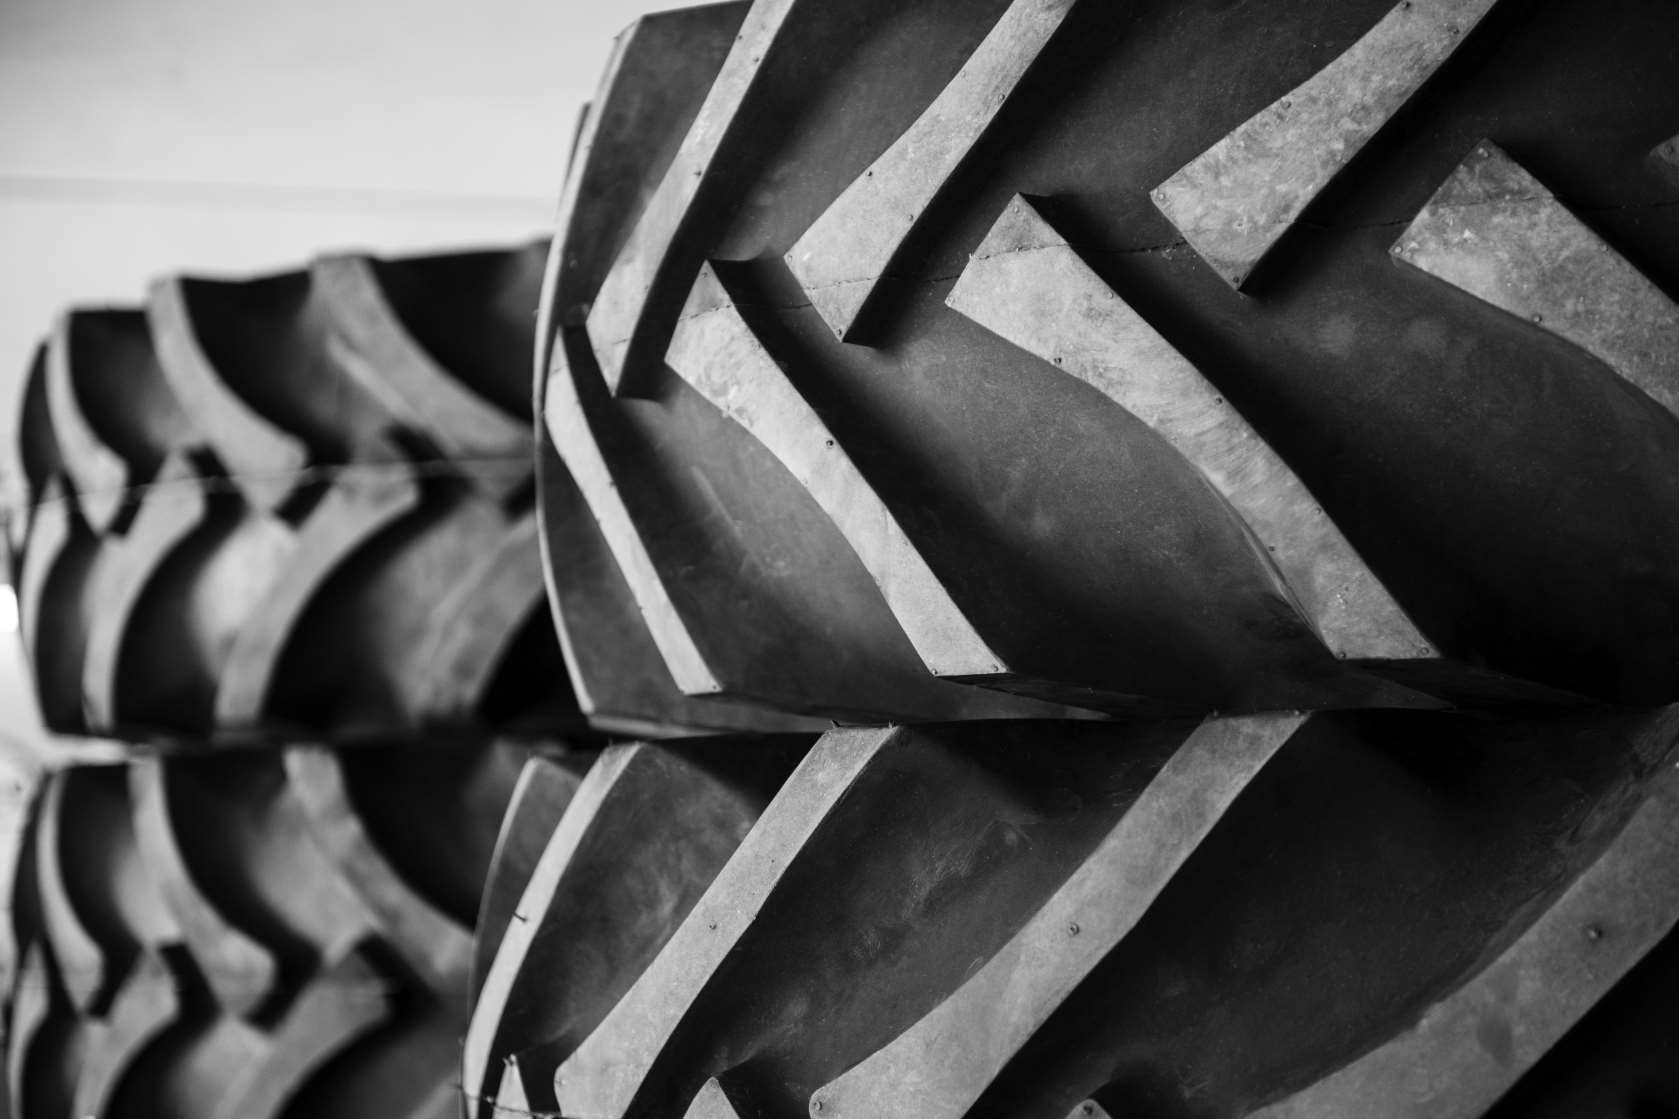 Southern Industrial Tyres has been acquired by Camso